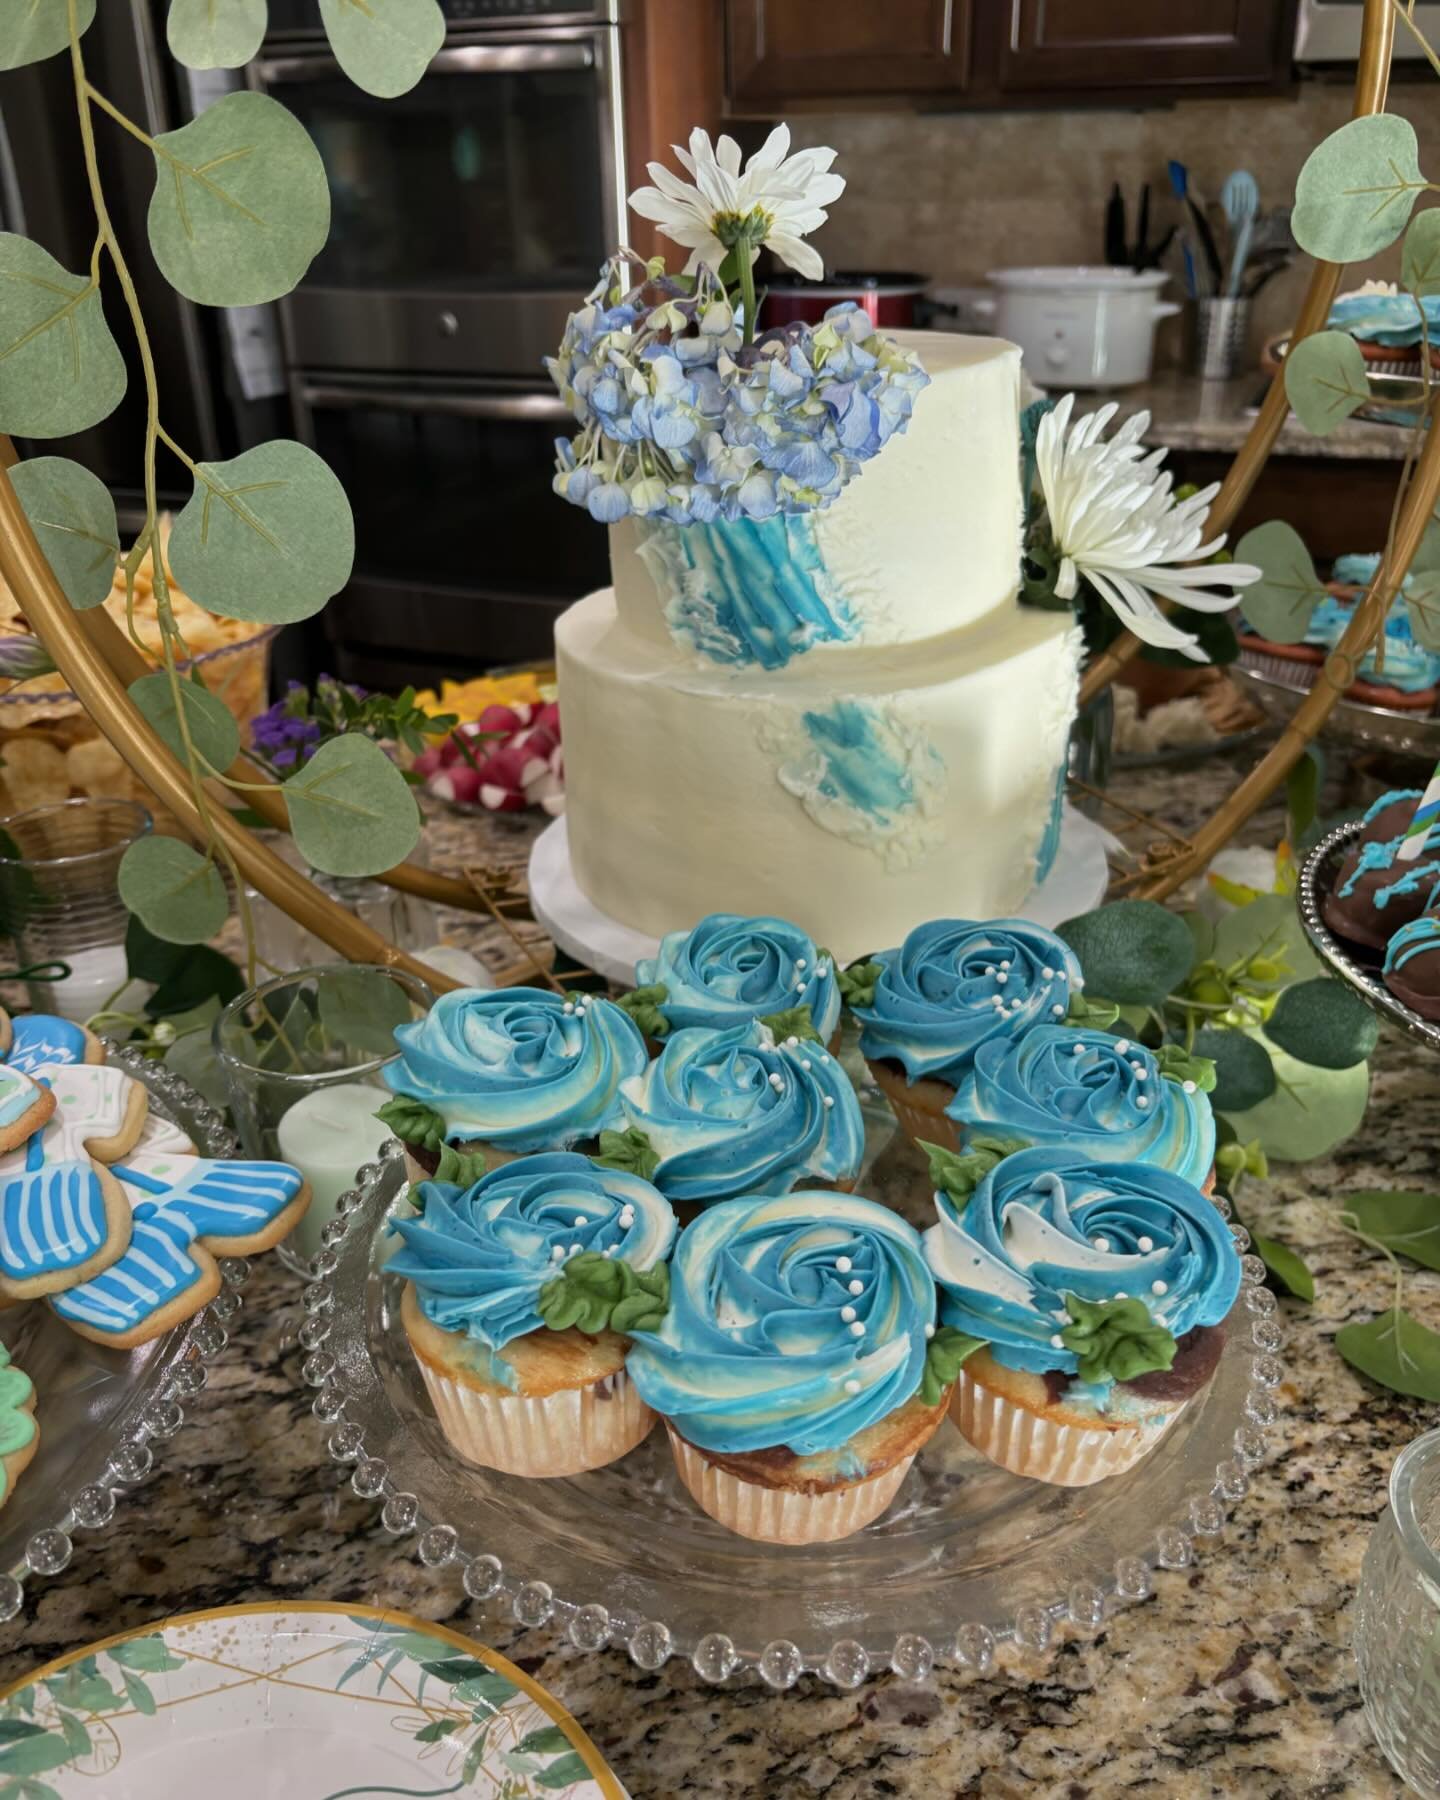 Dessert table for a baby shower! Which would you choose? Vanilla cake, marble cake, marble cupcakes, strawberry cupcakes, Oreo cake balls, or decorated sugar cookies? 
.
.
.
.
.
.
#babyshower #babyboy #hallcountyga #flowerybranch #cake #cupcakes #des